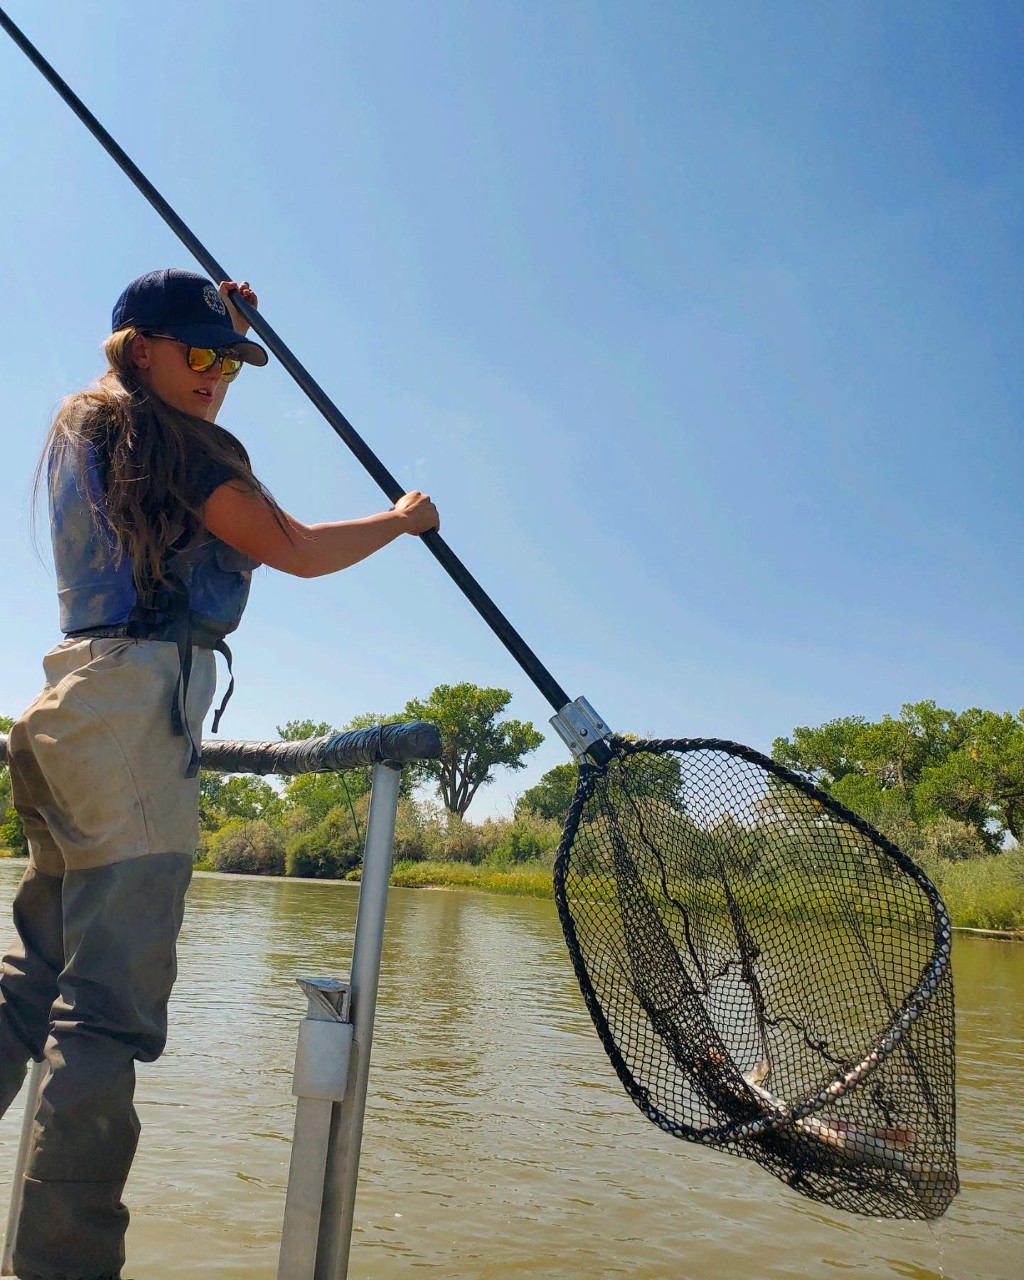 A young woman in gray waders dips a large net into a stream with a clear blue sky above her.